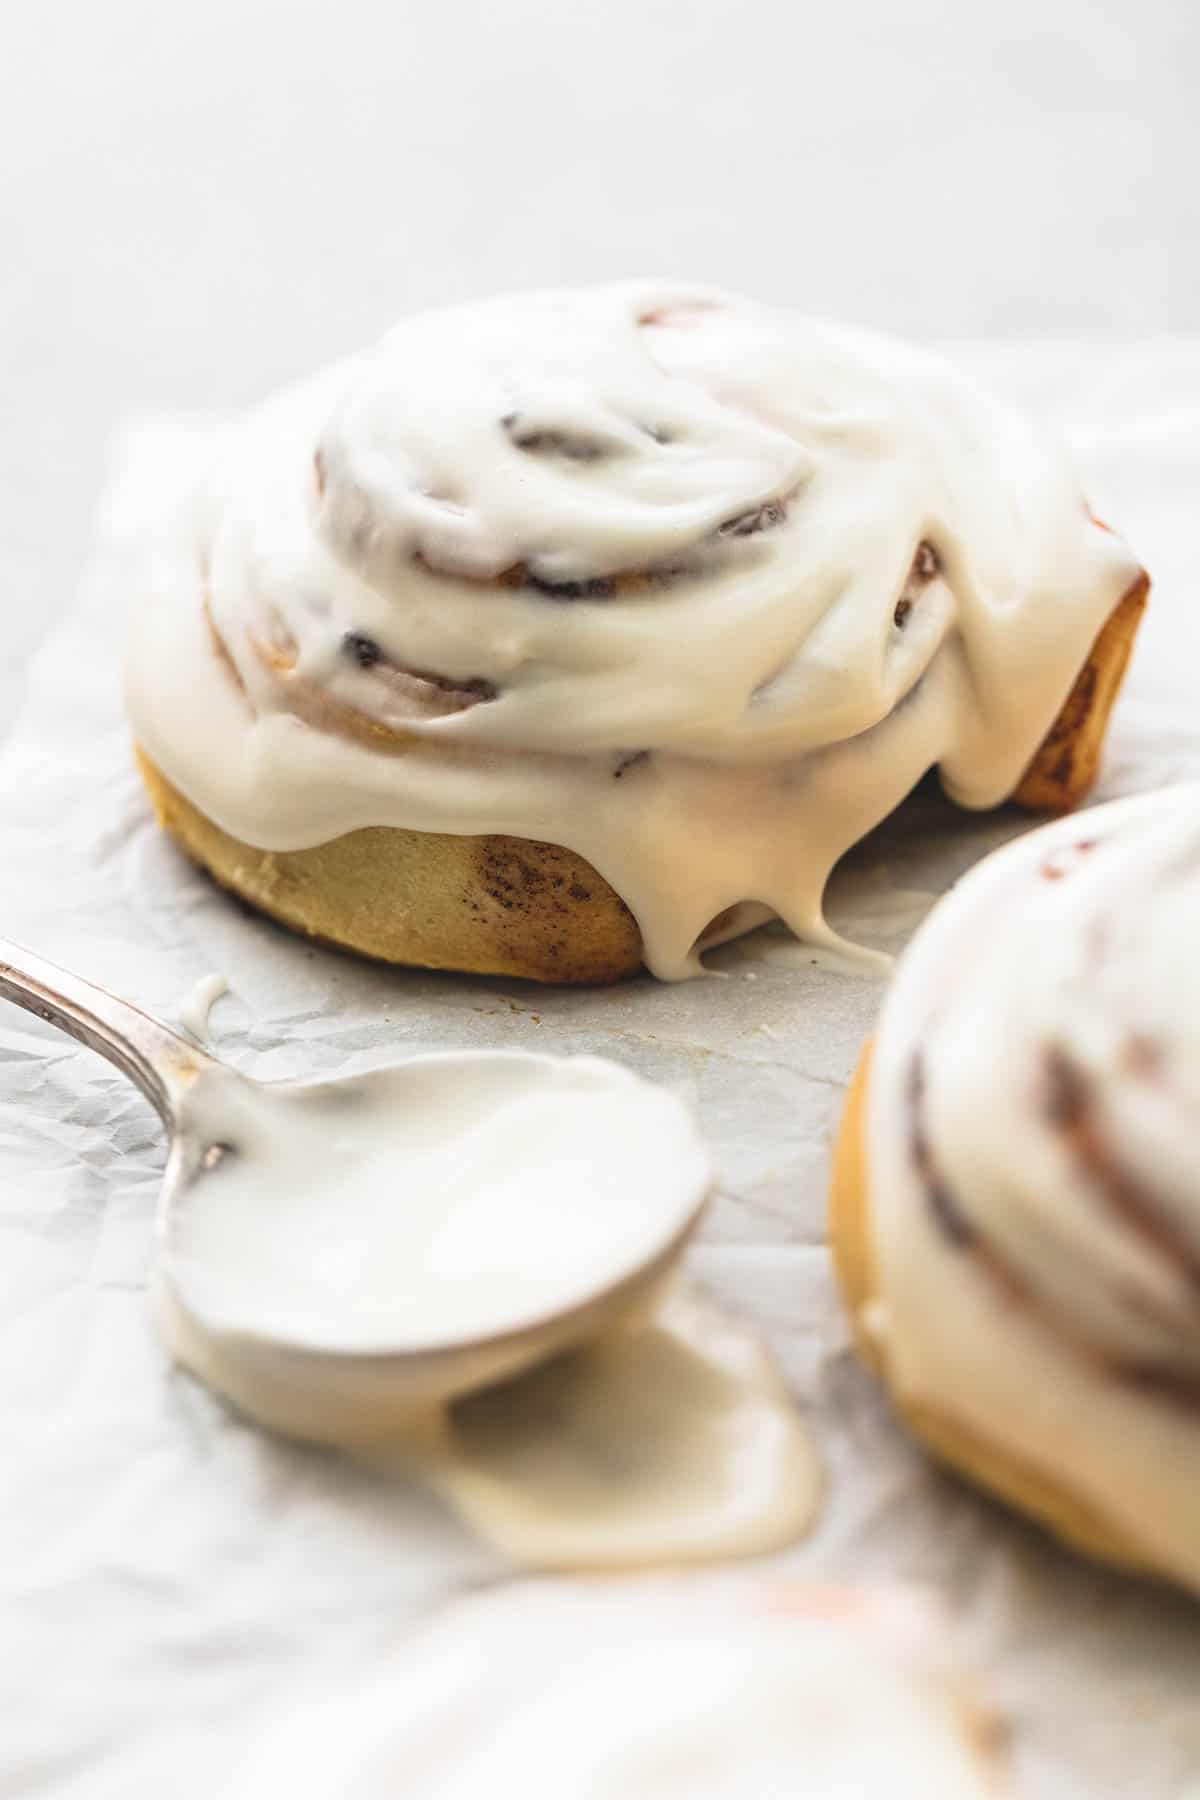 a spoon with cinnamon roll icing on it with an iced cinnamon roll behind it and on the side.